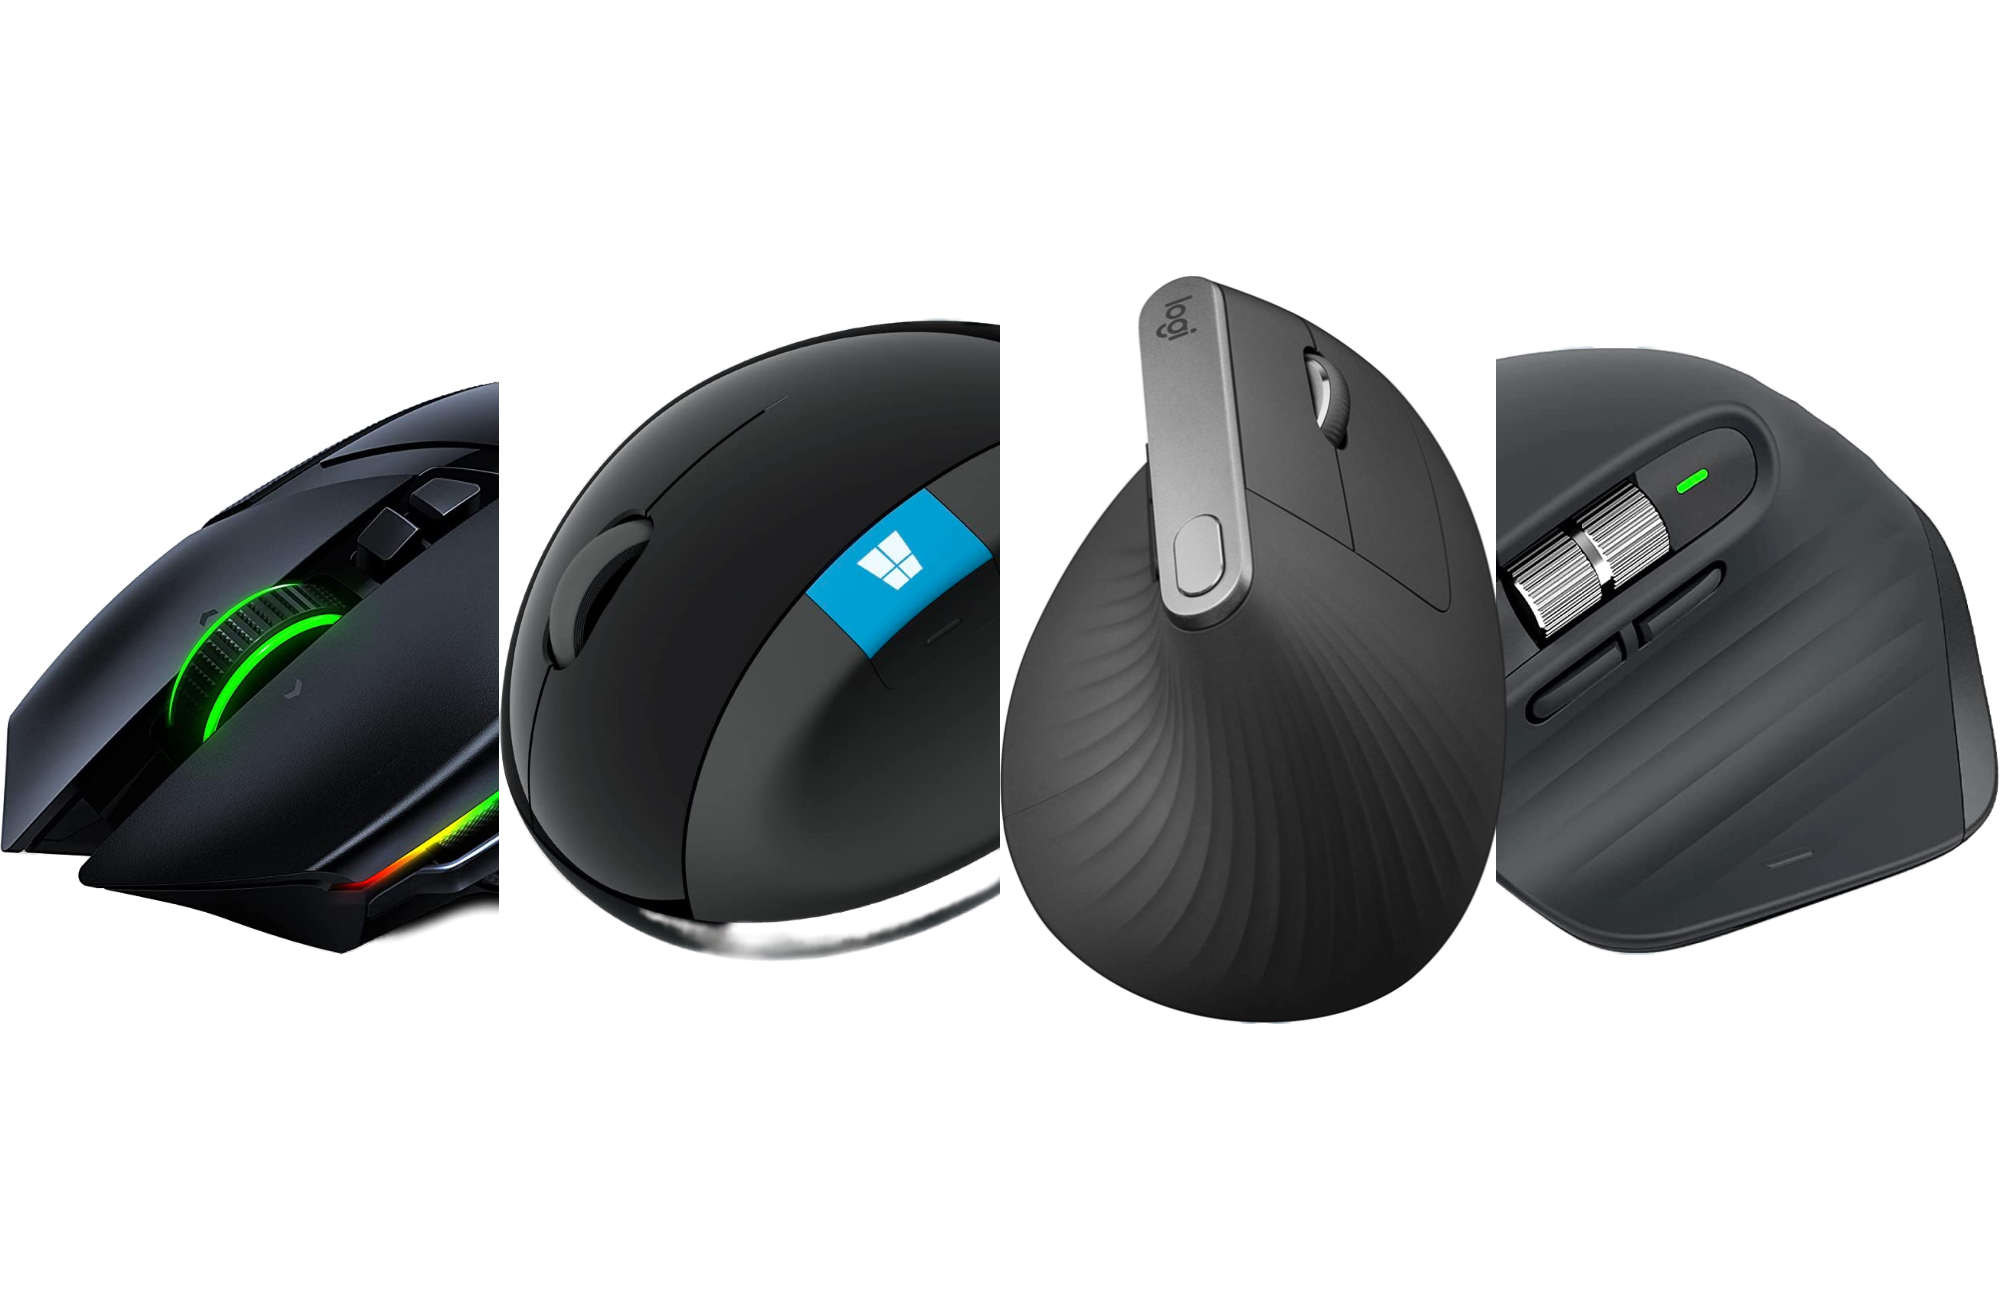 Are wireless or wired mice best for gaming?